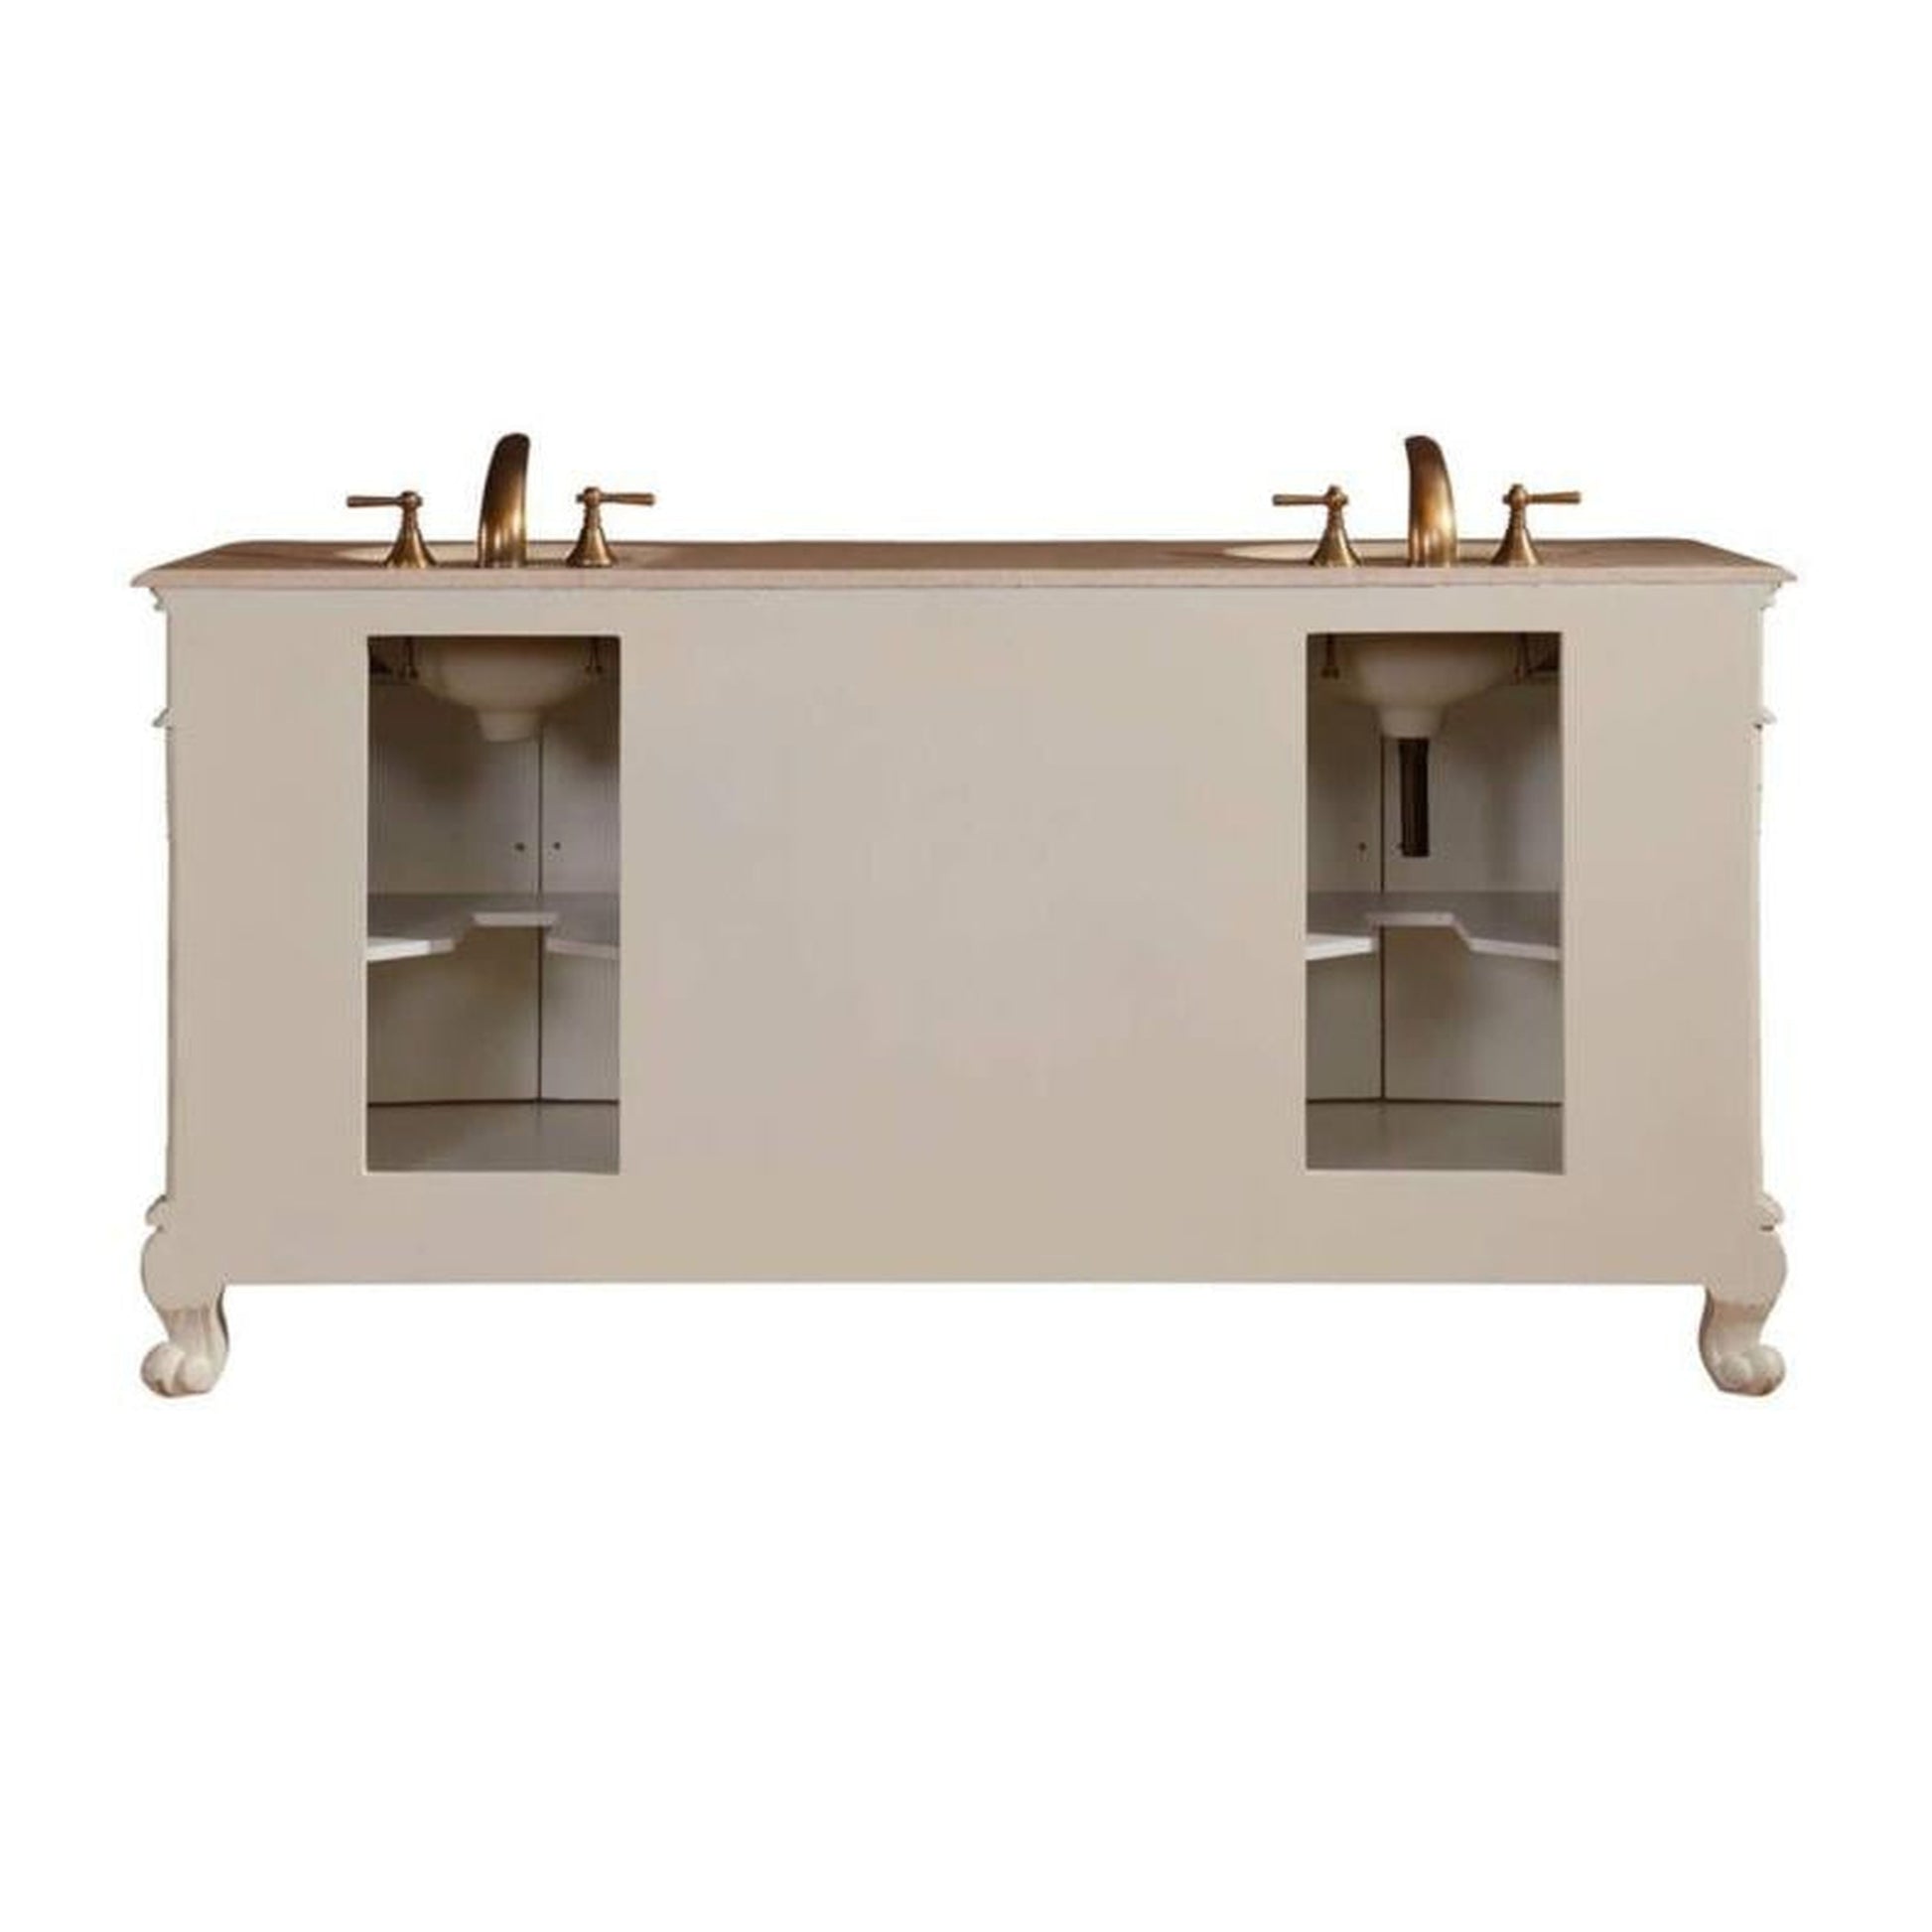 Silkroad Exclusive 72" Double Sink Antique White Bathroom Vanity With Crema Marfil Marble Countertop and White Ceramic Undermount Sink